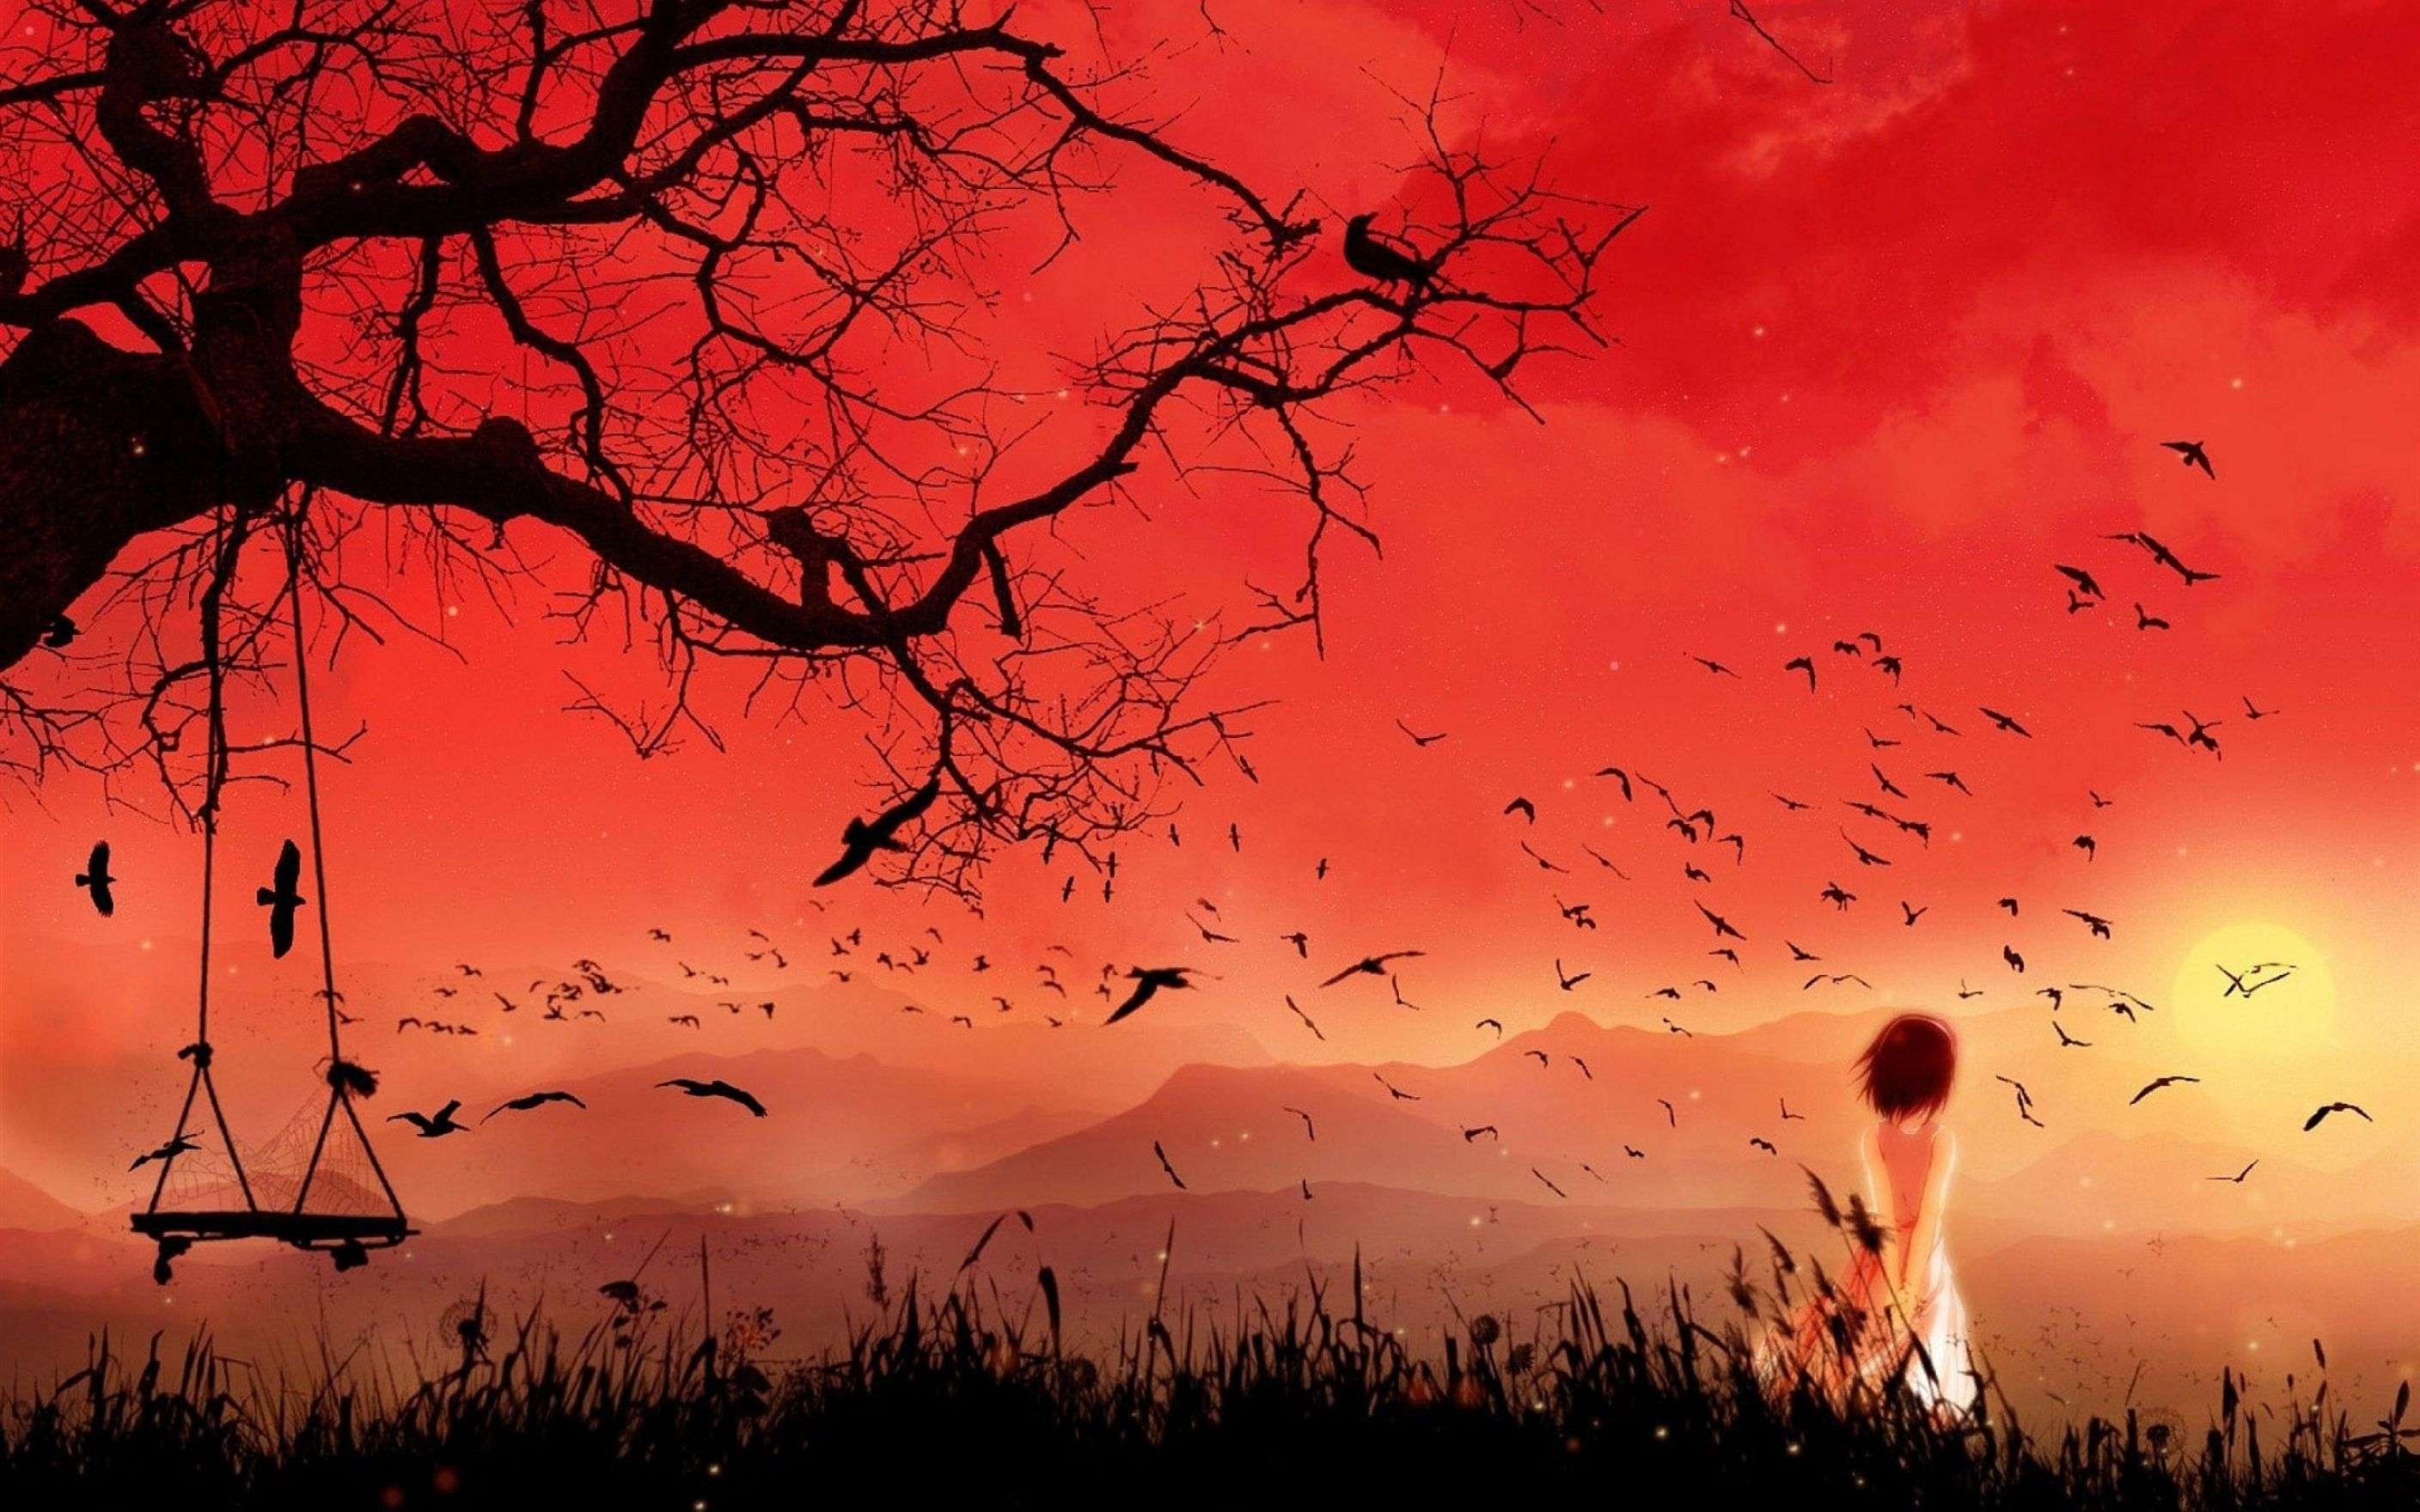 Anime Red Sky Wallpapers - Top Free Anime Red Sky Backgrounds